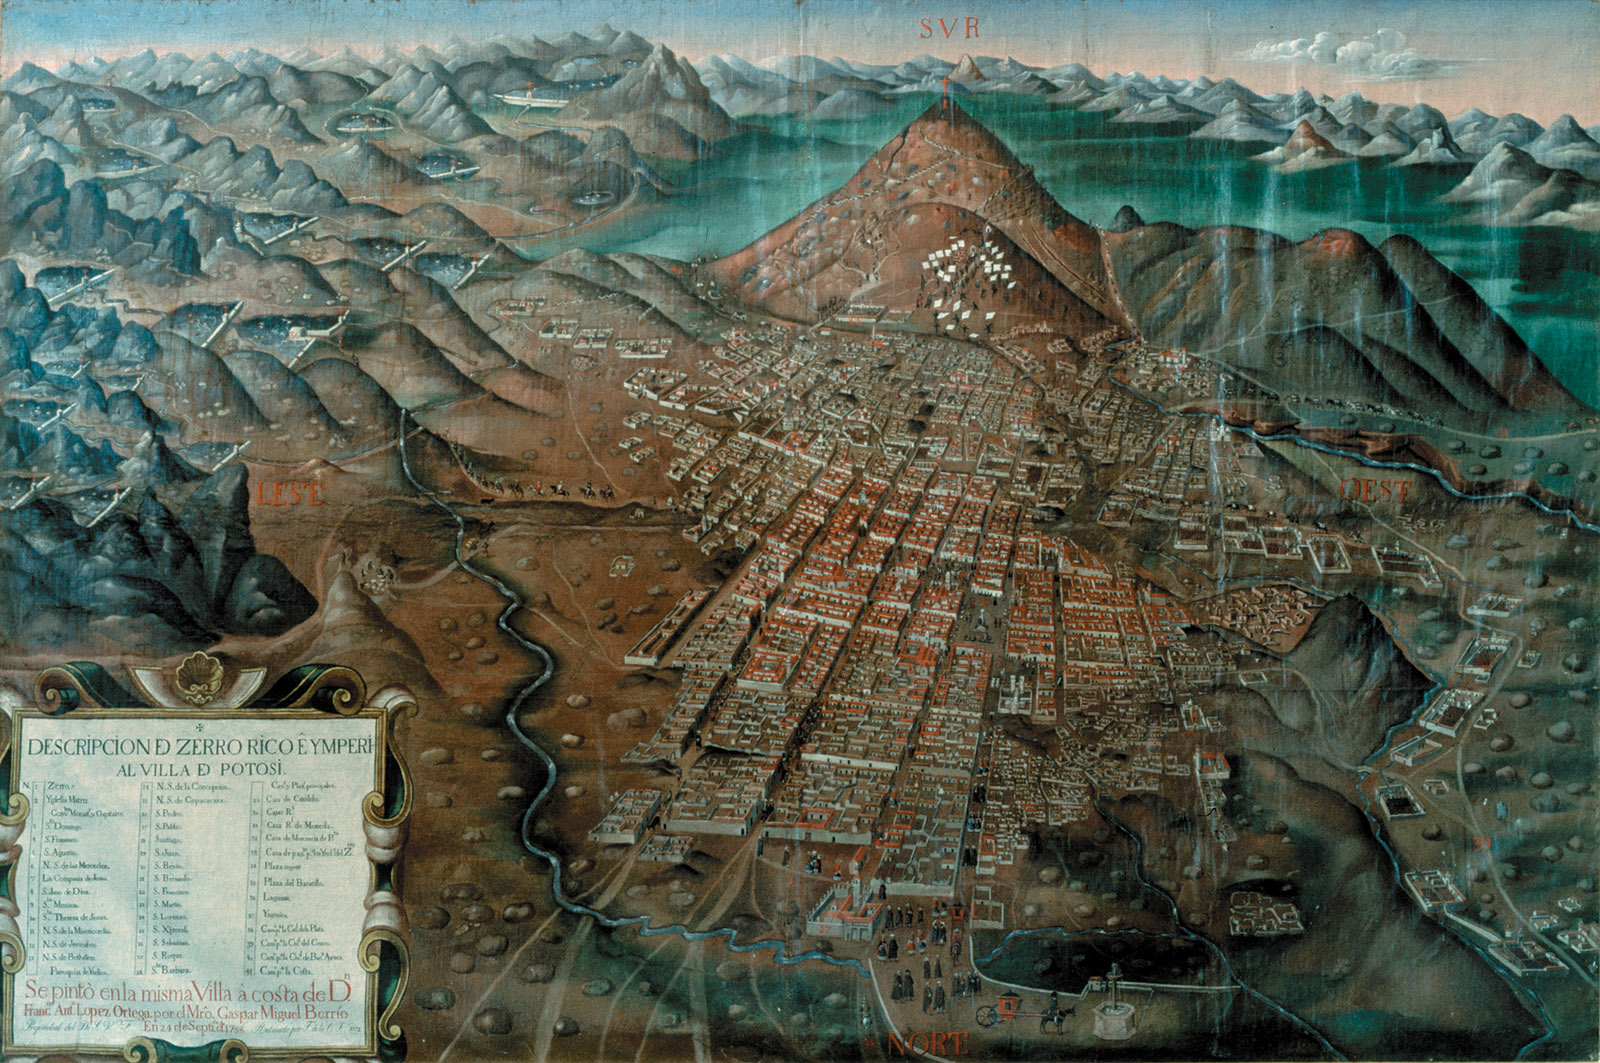 The Cerro Rico (Rich Hill) and the city of Potosí, in what is now Bolivia; painting by Gaspar Miguel Berrio, 1758